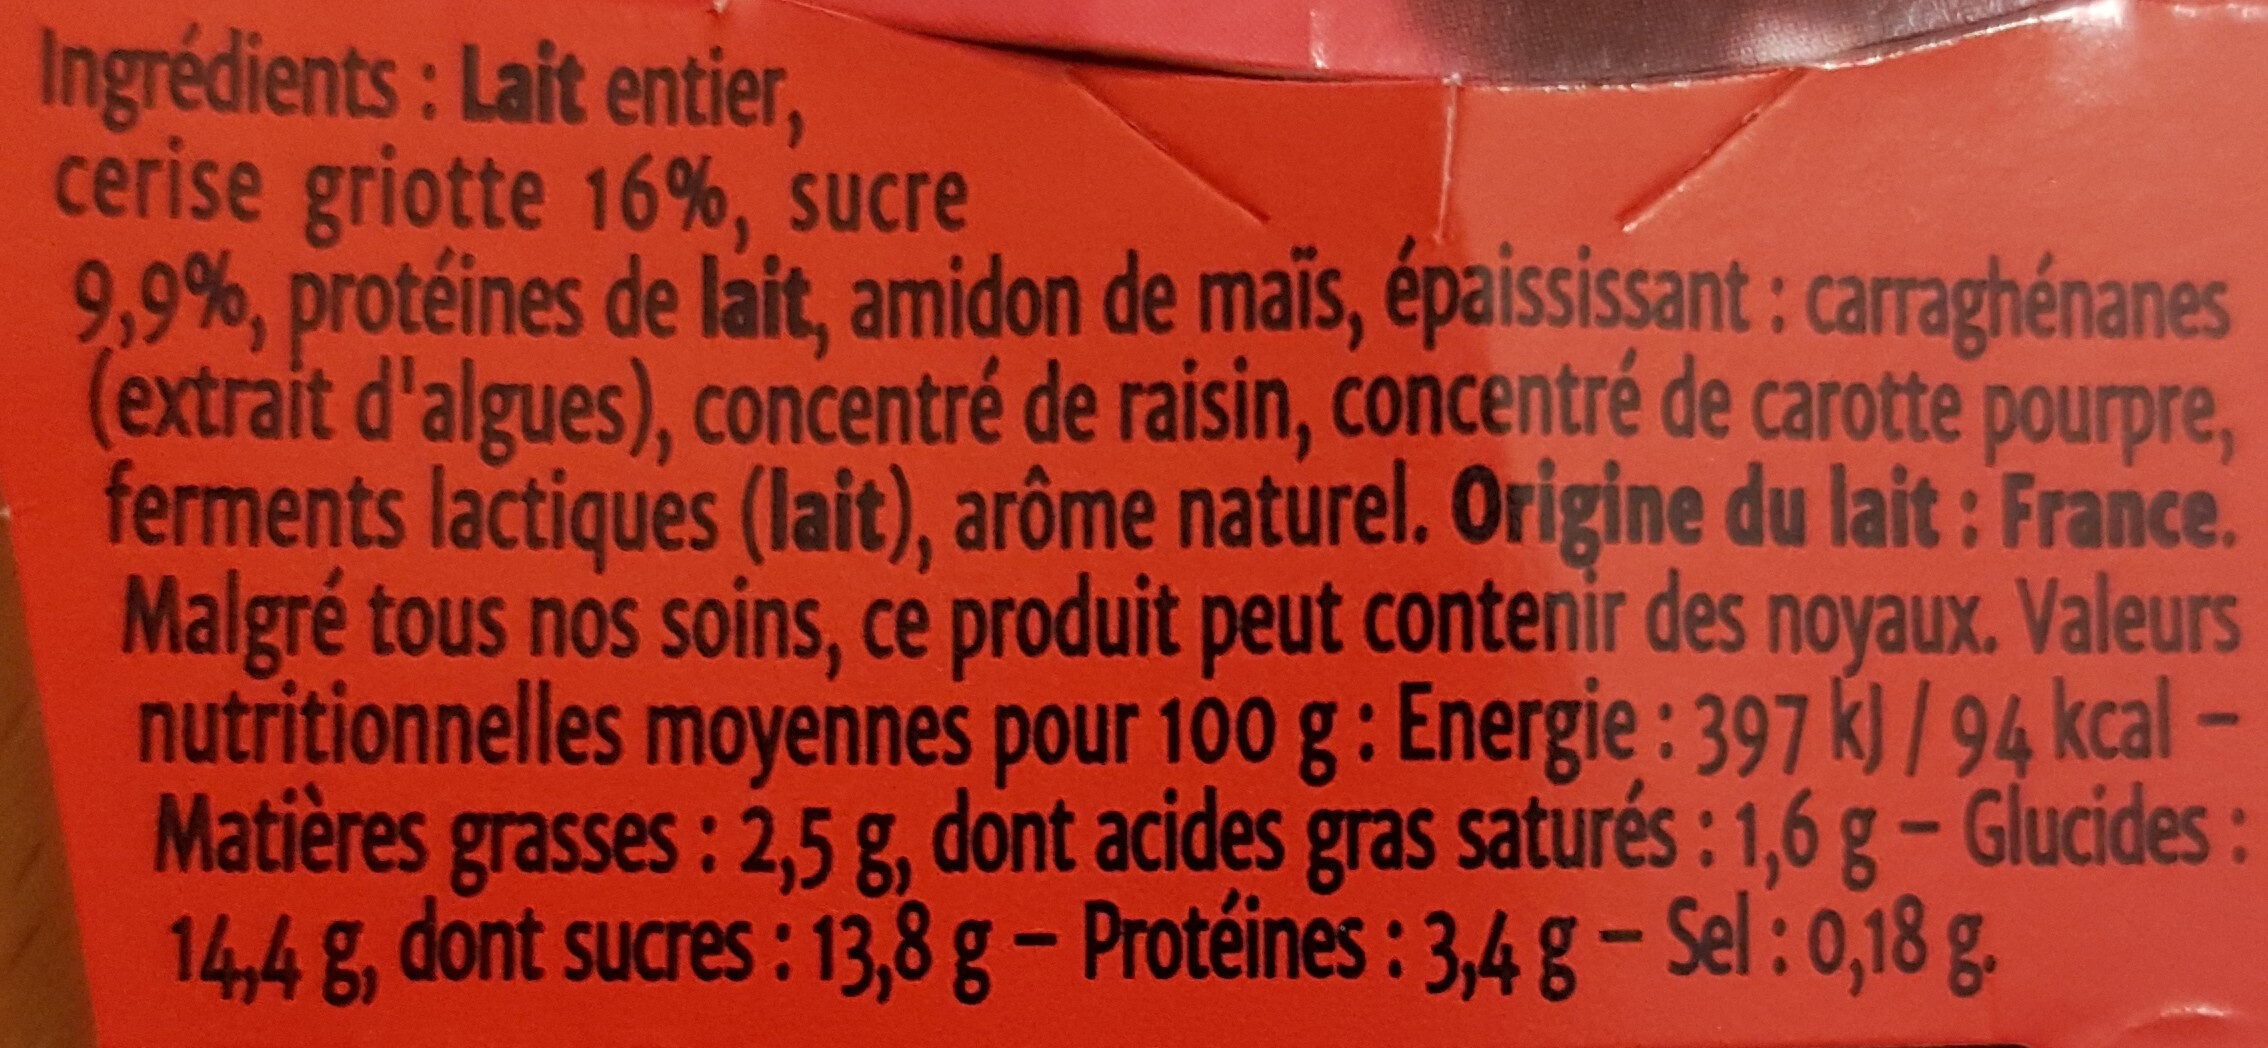 Yaourt Gourmand Cerises Griottes - Nutrition facts - fr